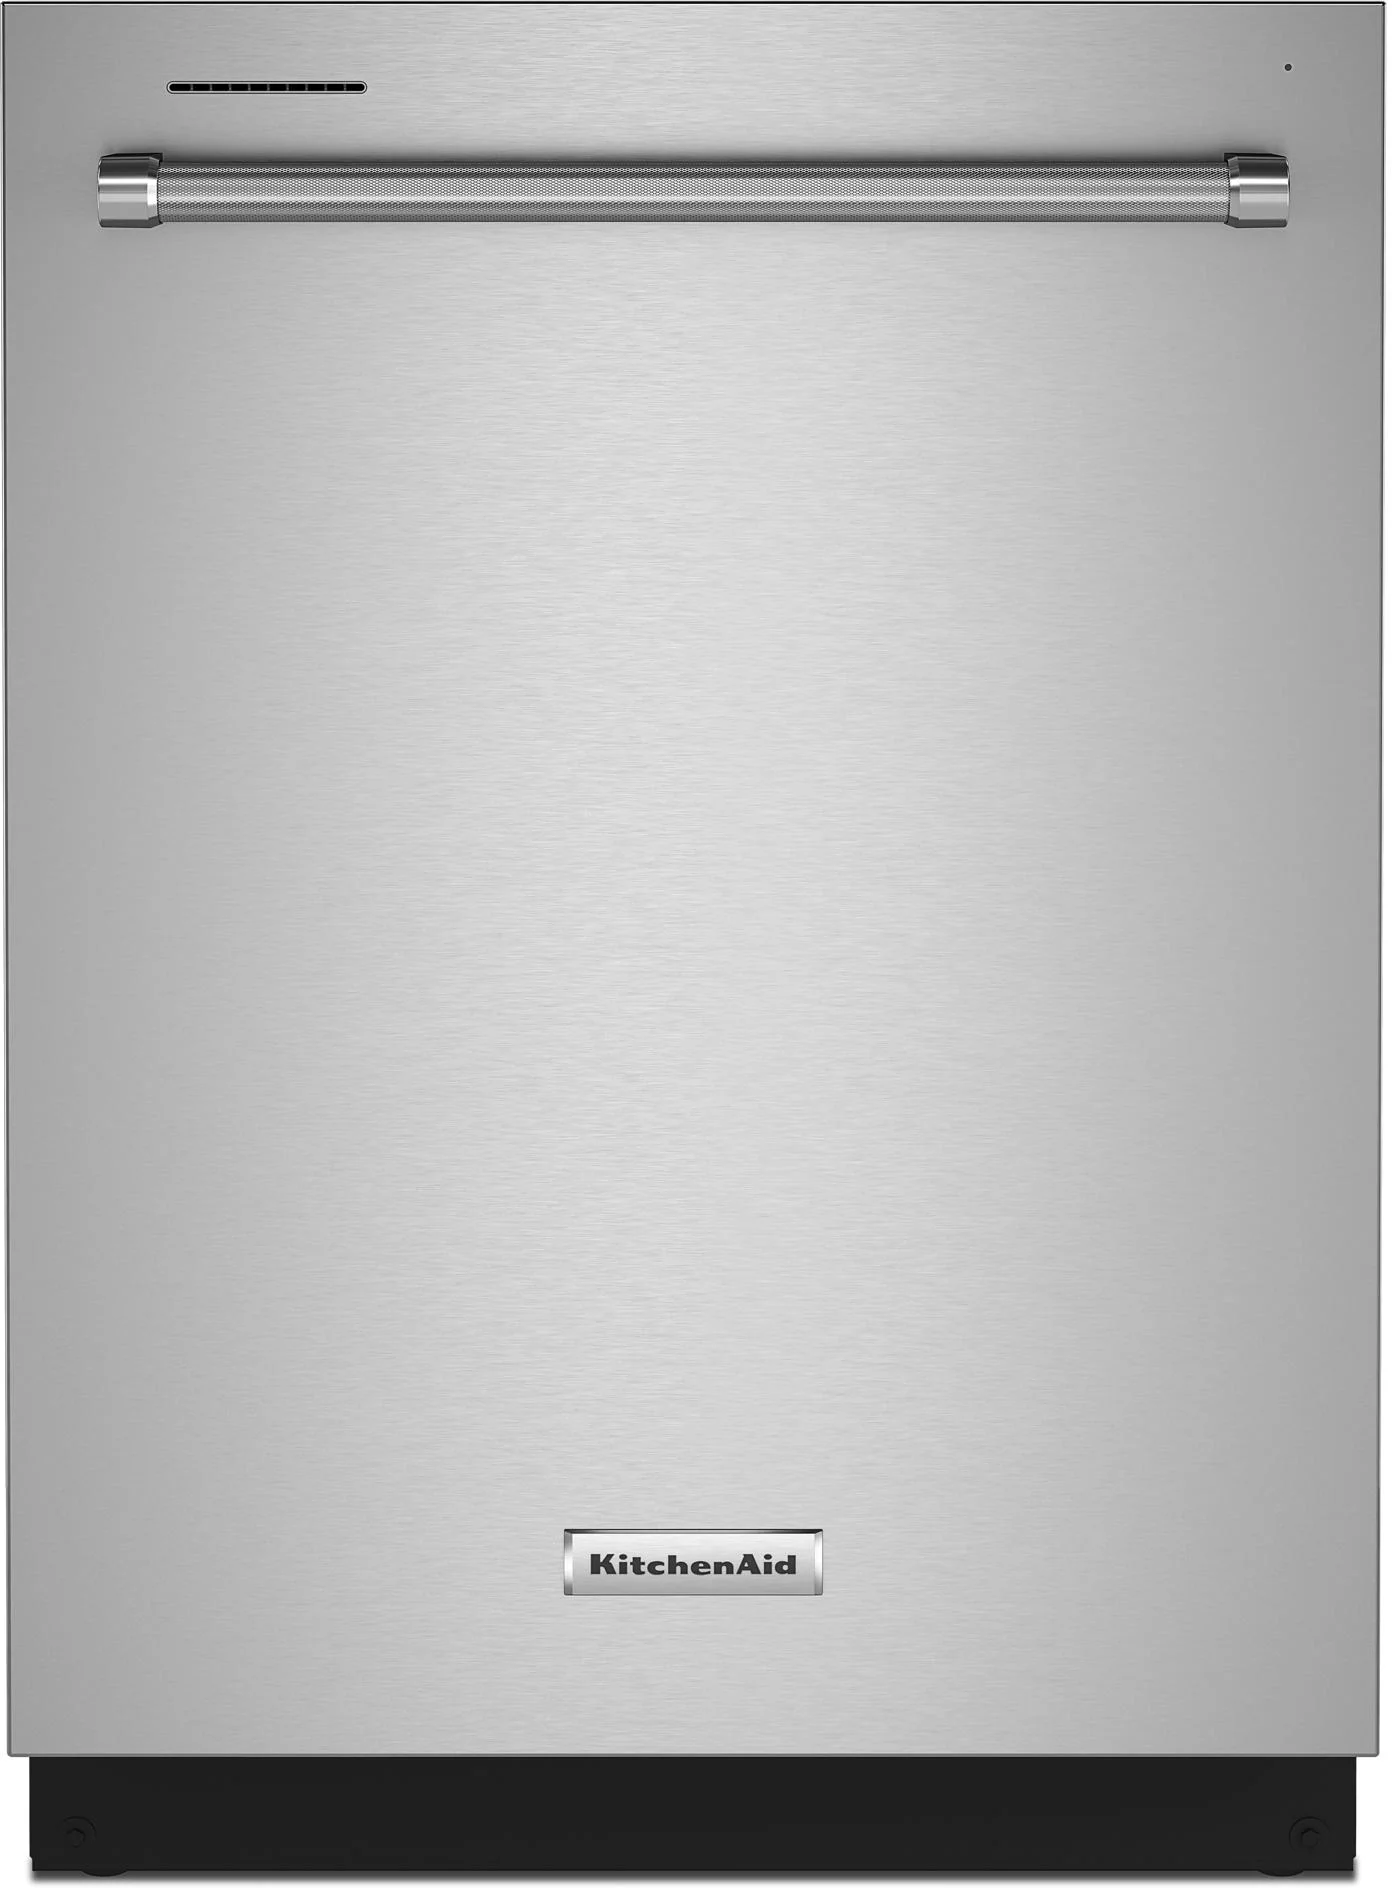 KitchenAid KDTE204KBS 24 Inch Wide 13 Place Setting Energy